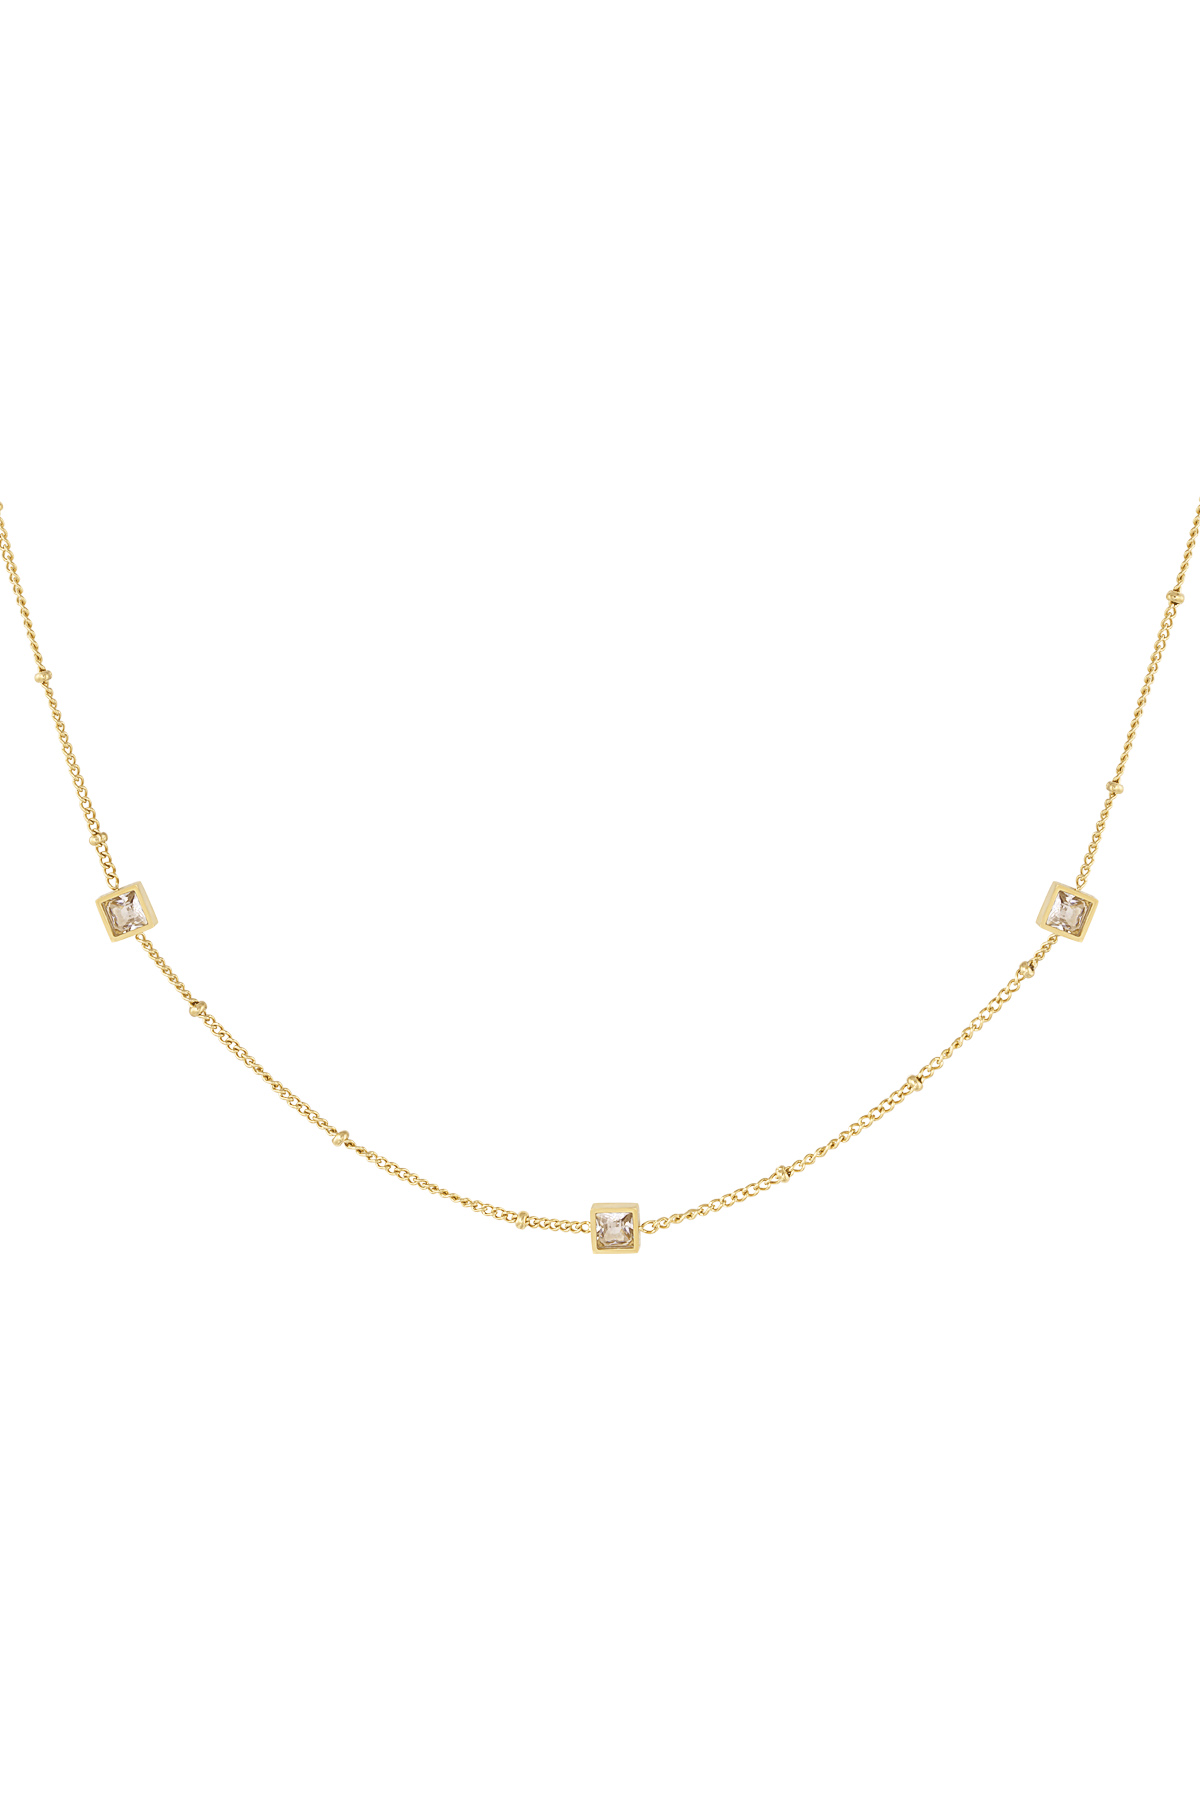 Necklace square stones - gold h5 